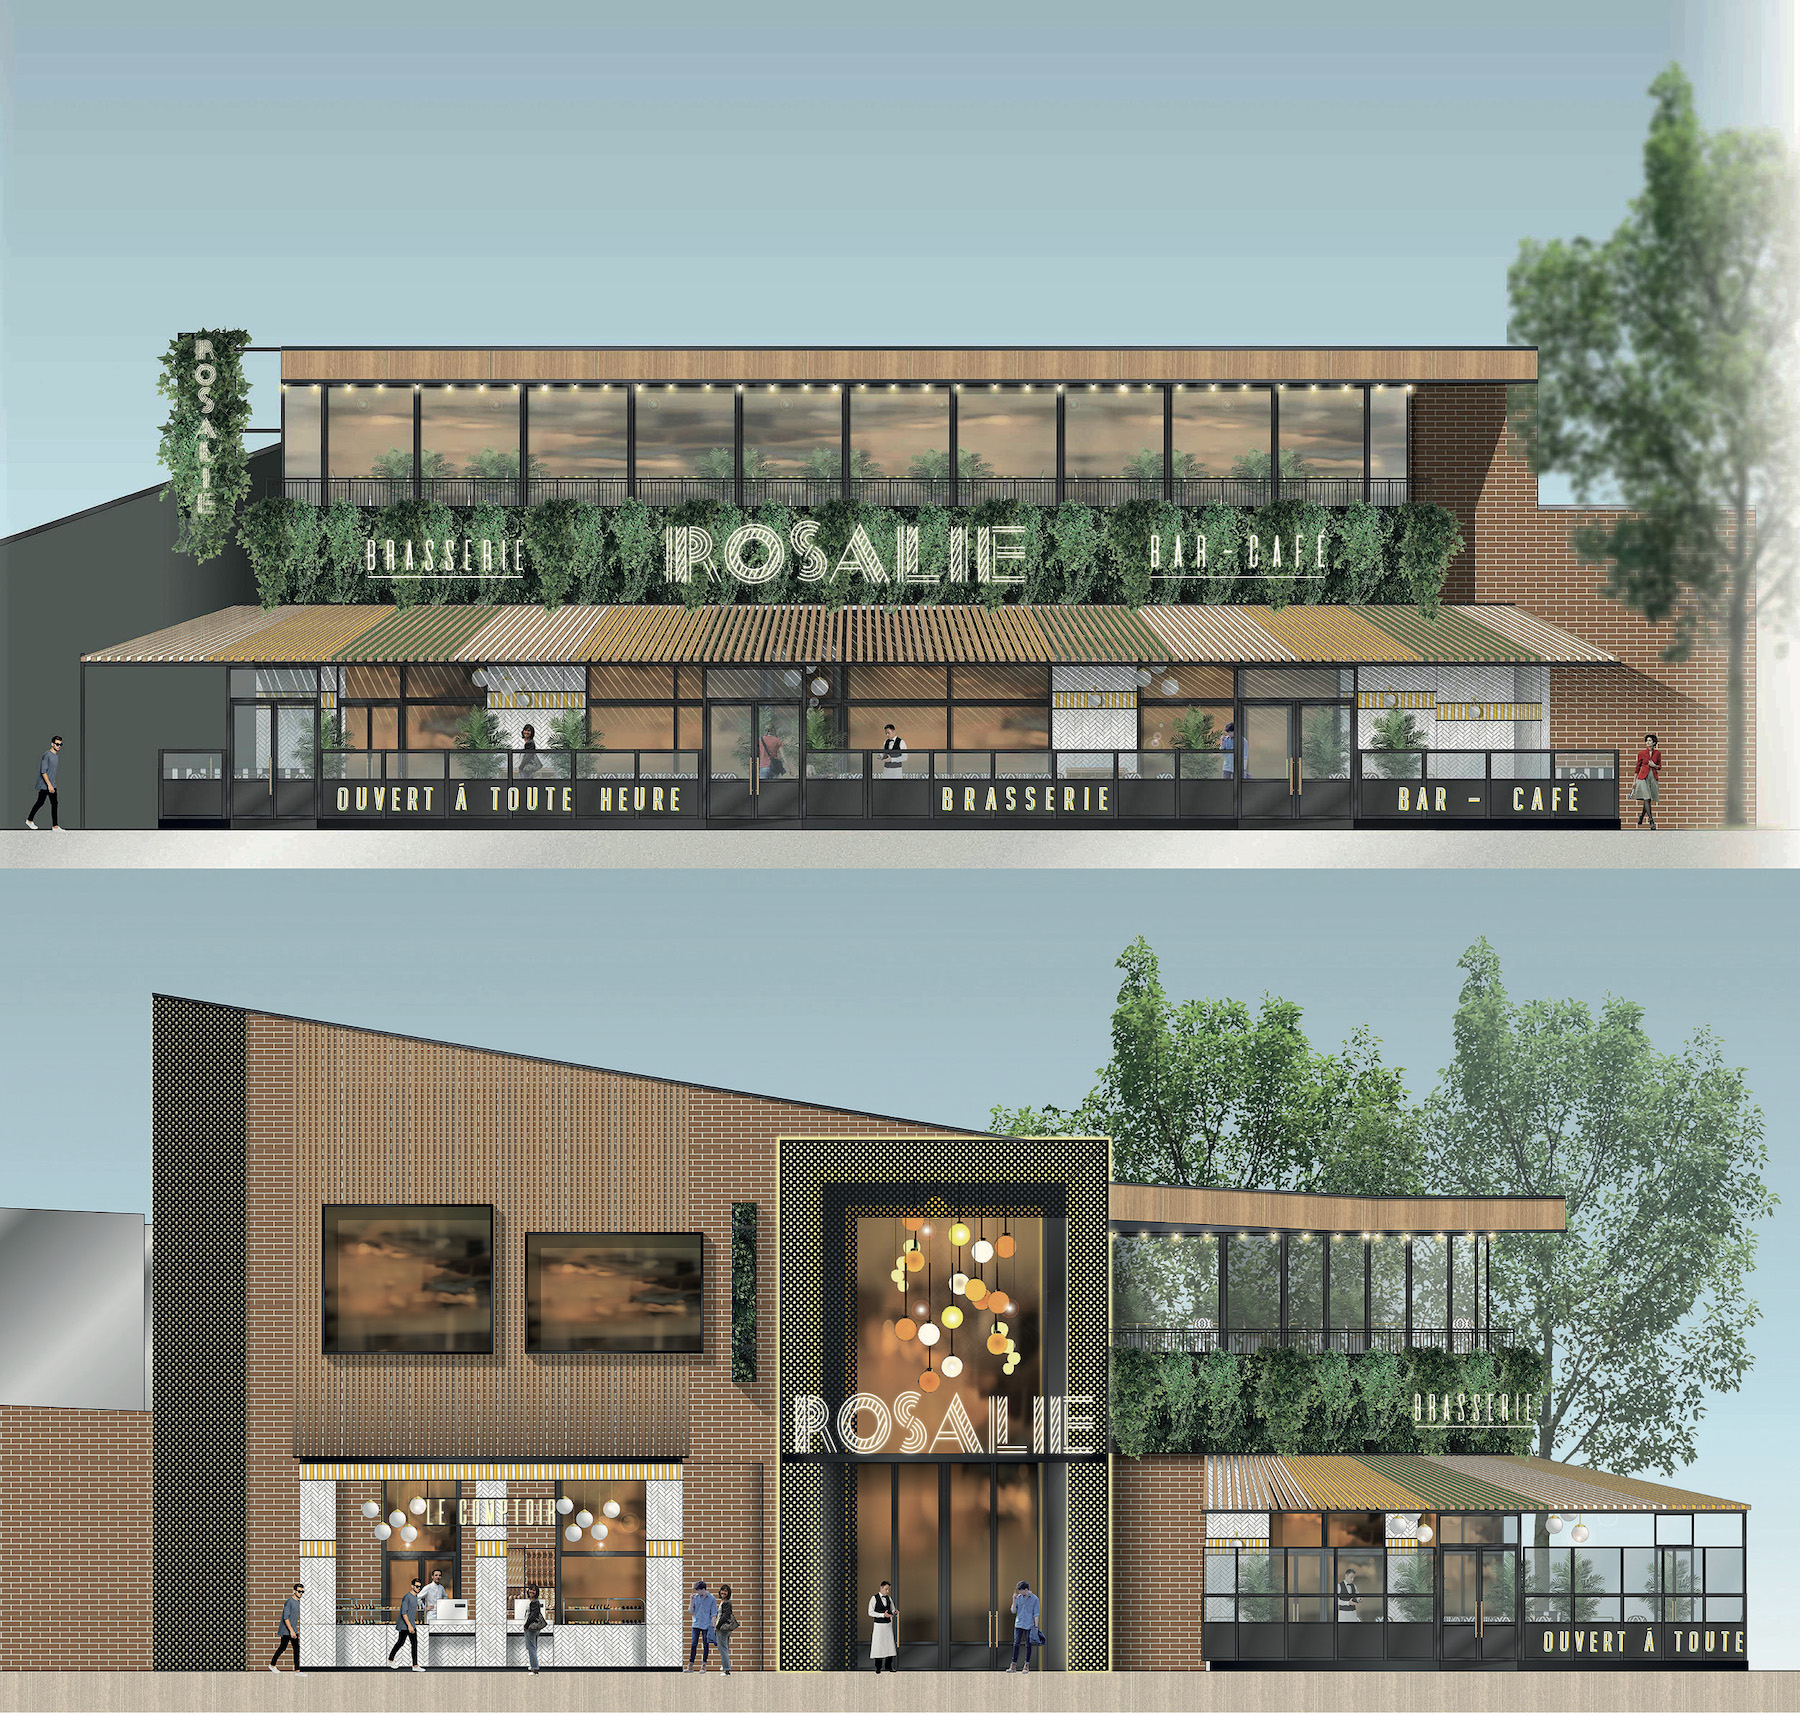 Rosalie, The New “French-style” Brasserie inside Disney Village set to open on the 8th December